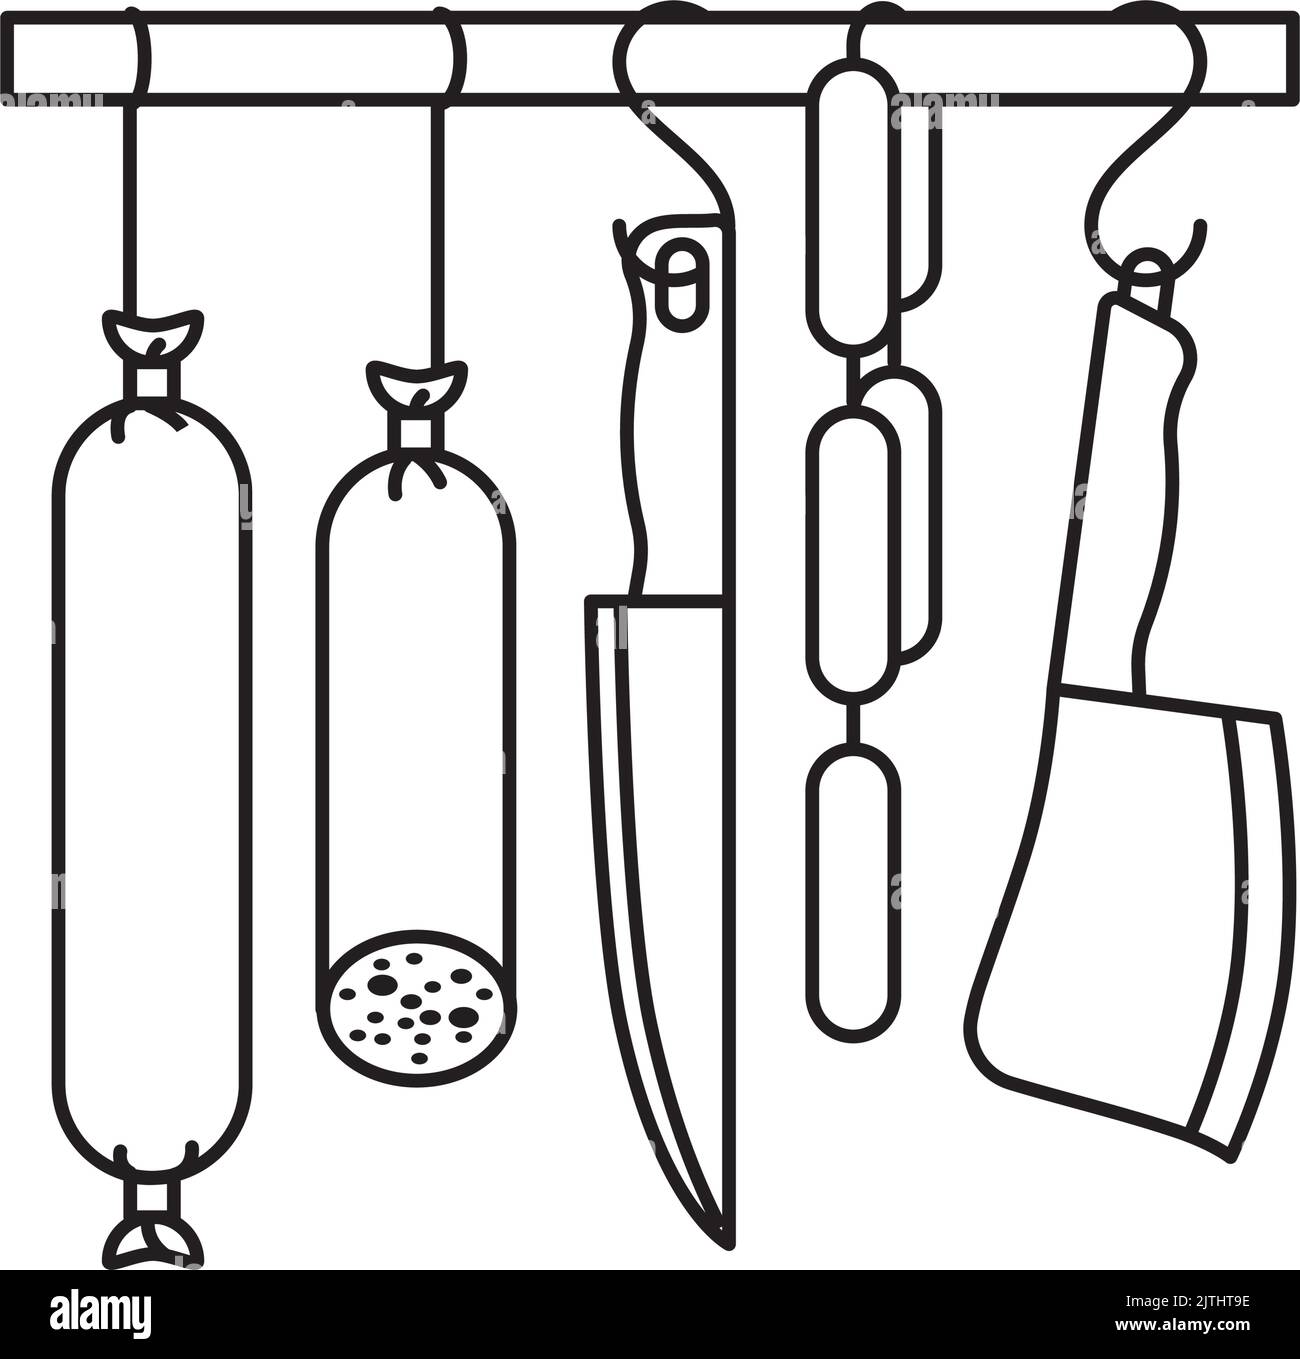 Salami sausages and knives hanging from rail line icon vector illustration for Salami Day on September 7 Stock Vector